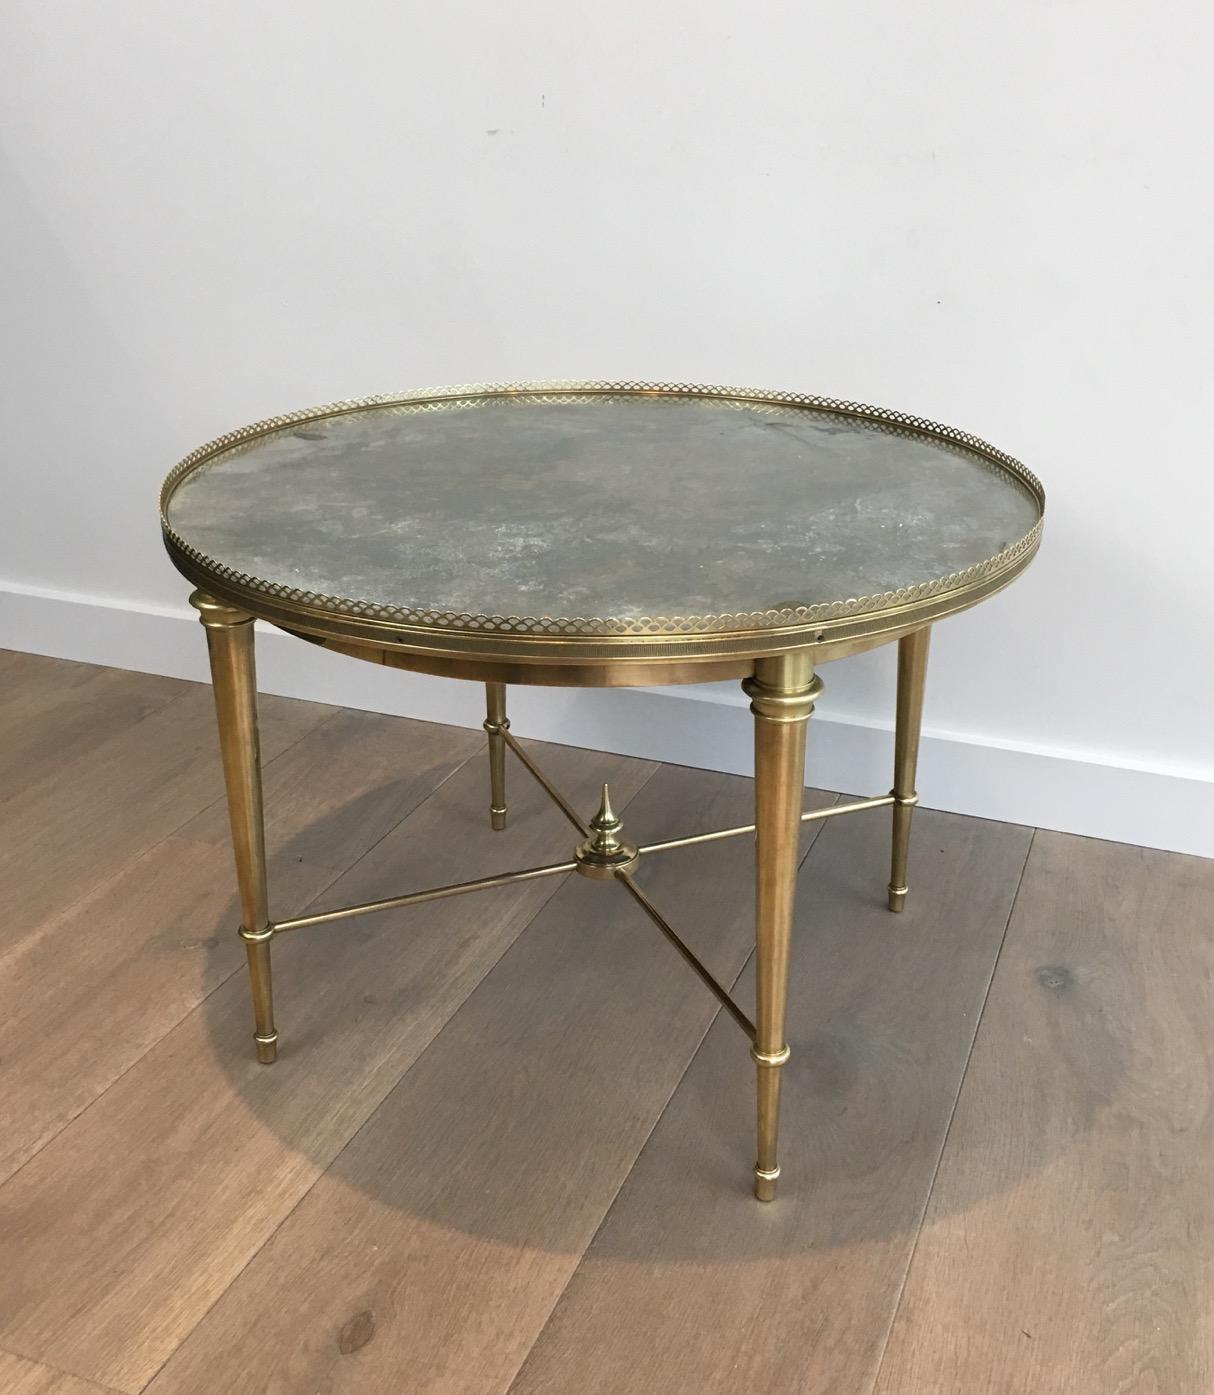 French Maison Ramsay, Neoclassical Round Brass Coffee Table with Eglomized Glass Top